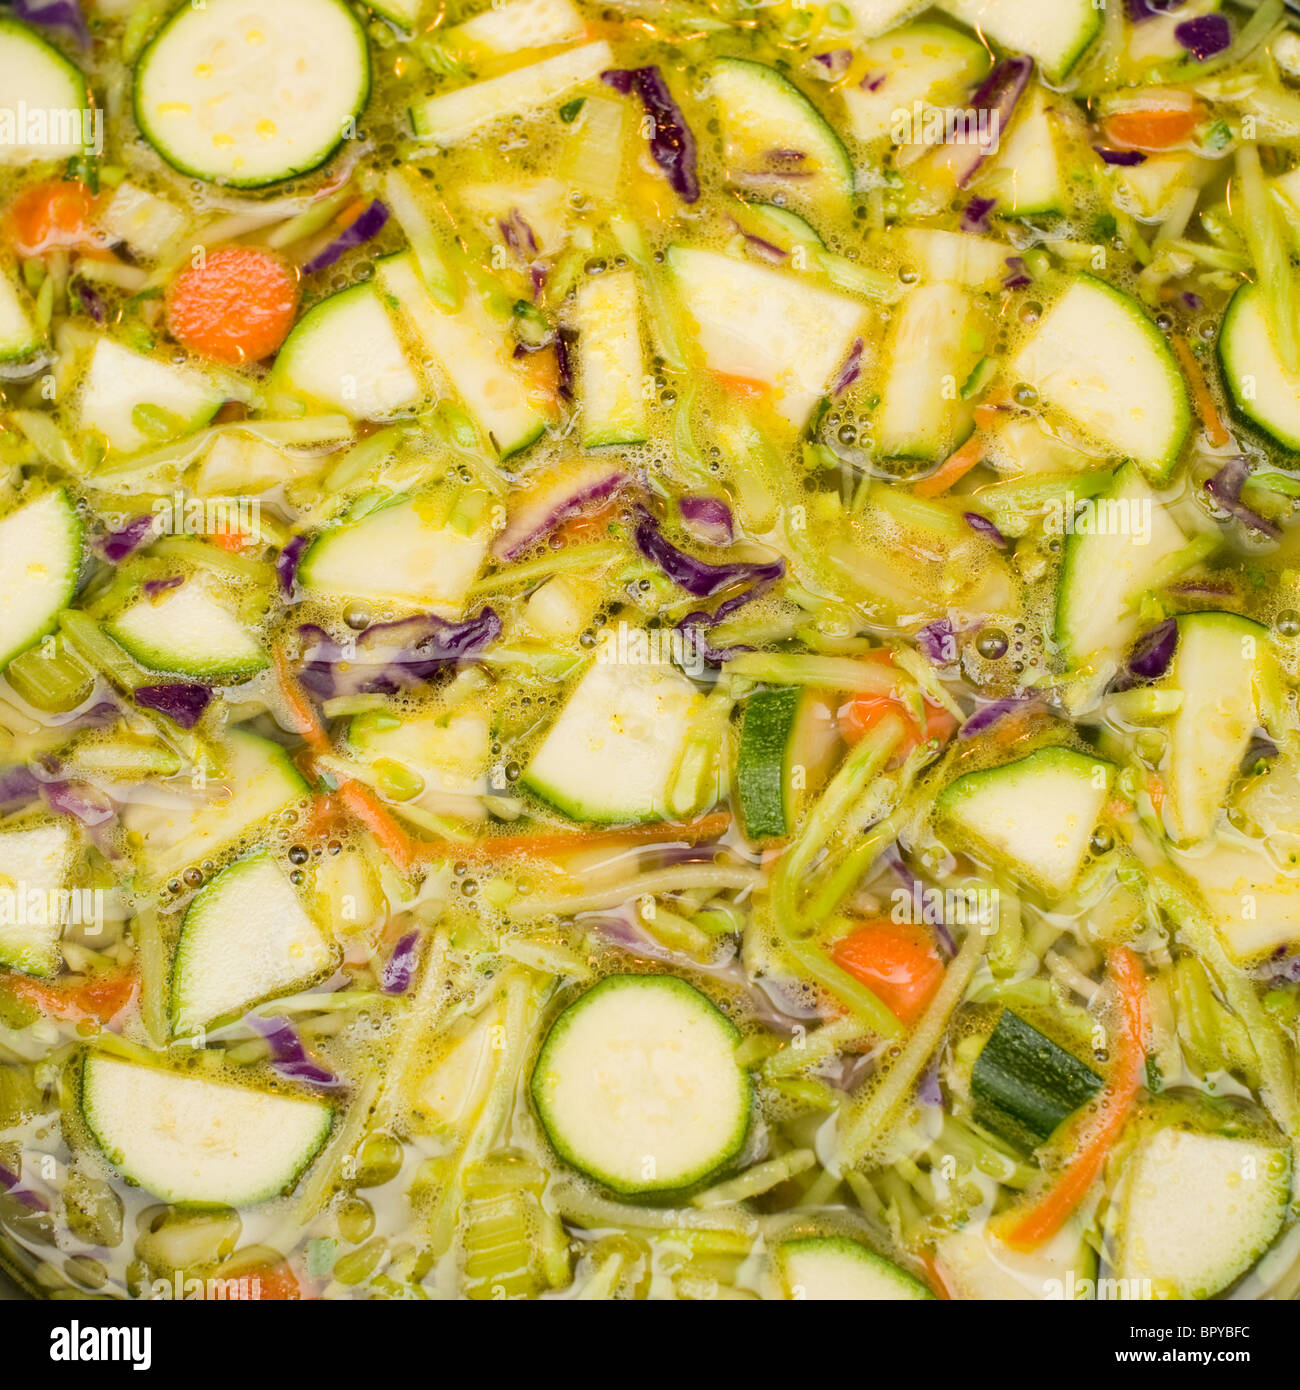 Vegetables cooking in chicken stock. One of the steps in making homemade chicken soup. Stock Photo